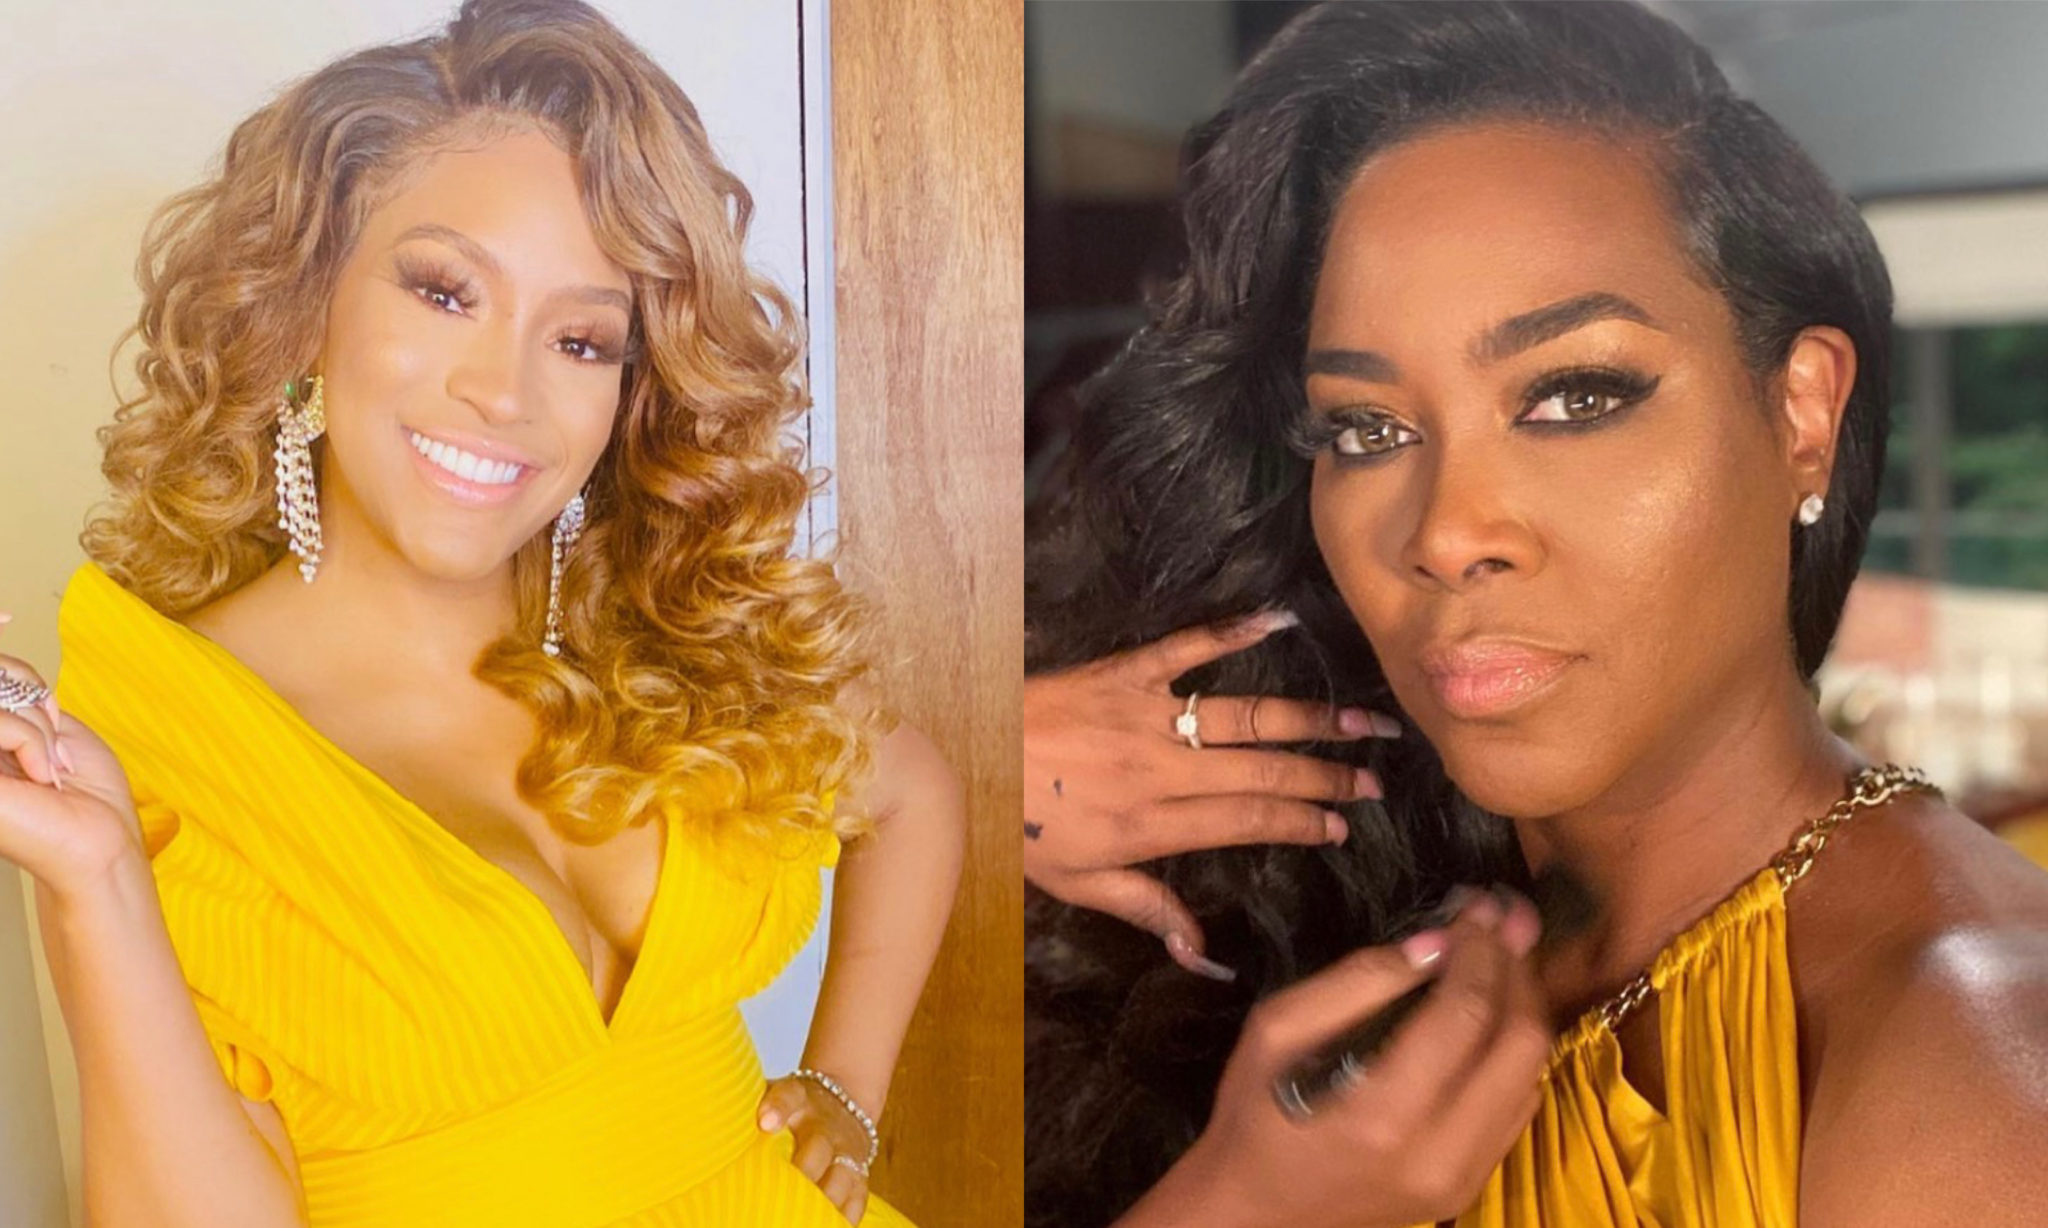 ‘You Would be Livid’: ‘RHOA’ Fans Slam Kenya Moore and Side with Drew Sidora Over Tweet About the ‘Step Up’ Actress’ Son